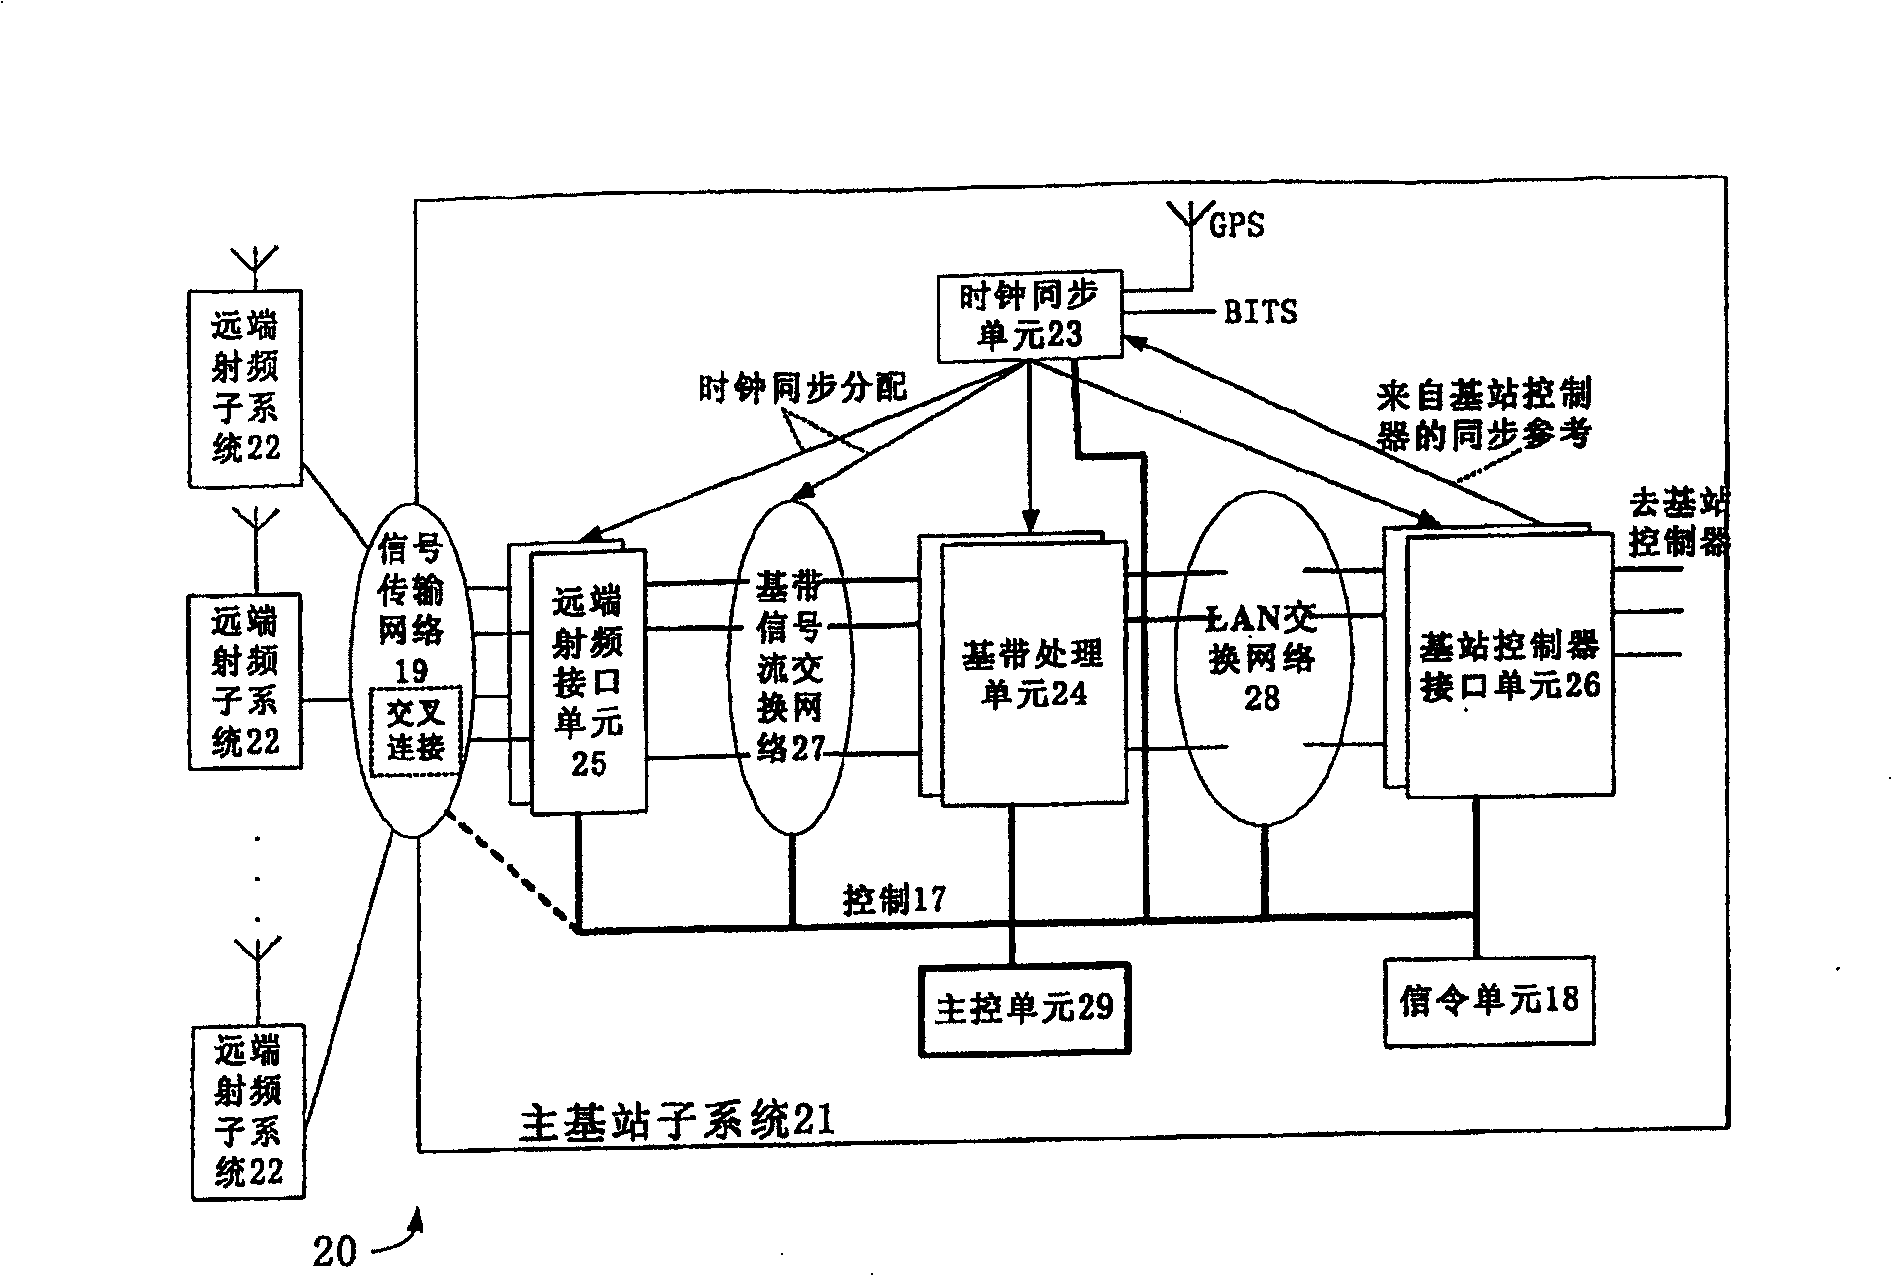 Central base station system based on advanced telecommunication computer system structure